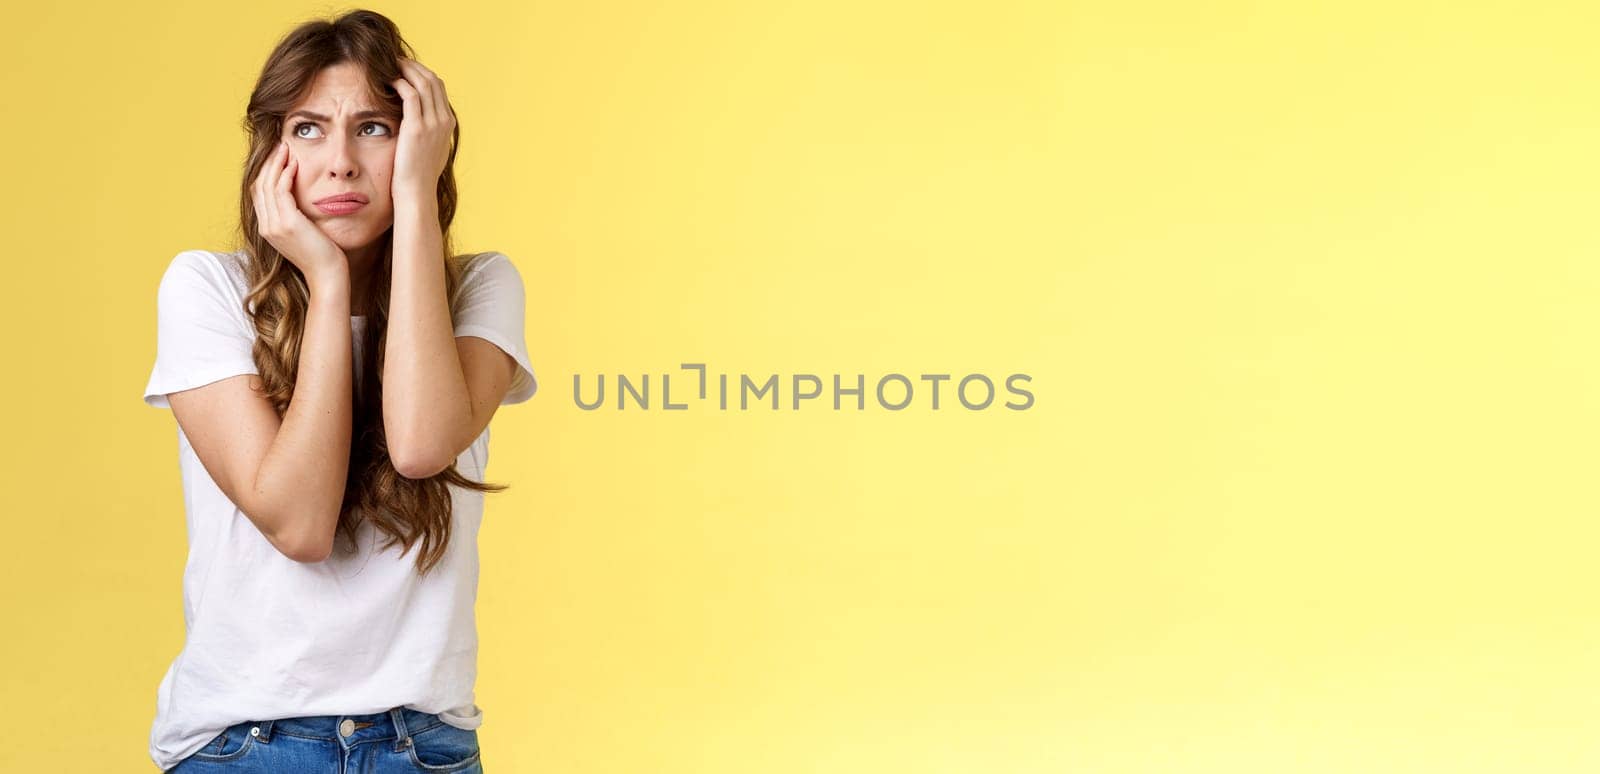 Shocked timid insecure young panicking woman wanna cry standing anxious frightened grab head both hands freak out look away praying for help terrified stand yellow background horrified. Lifestyle.